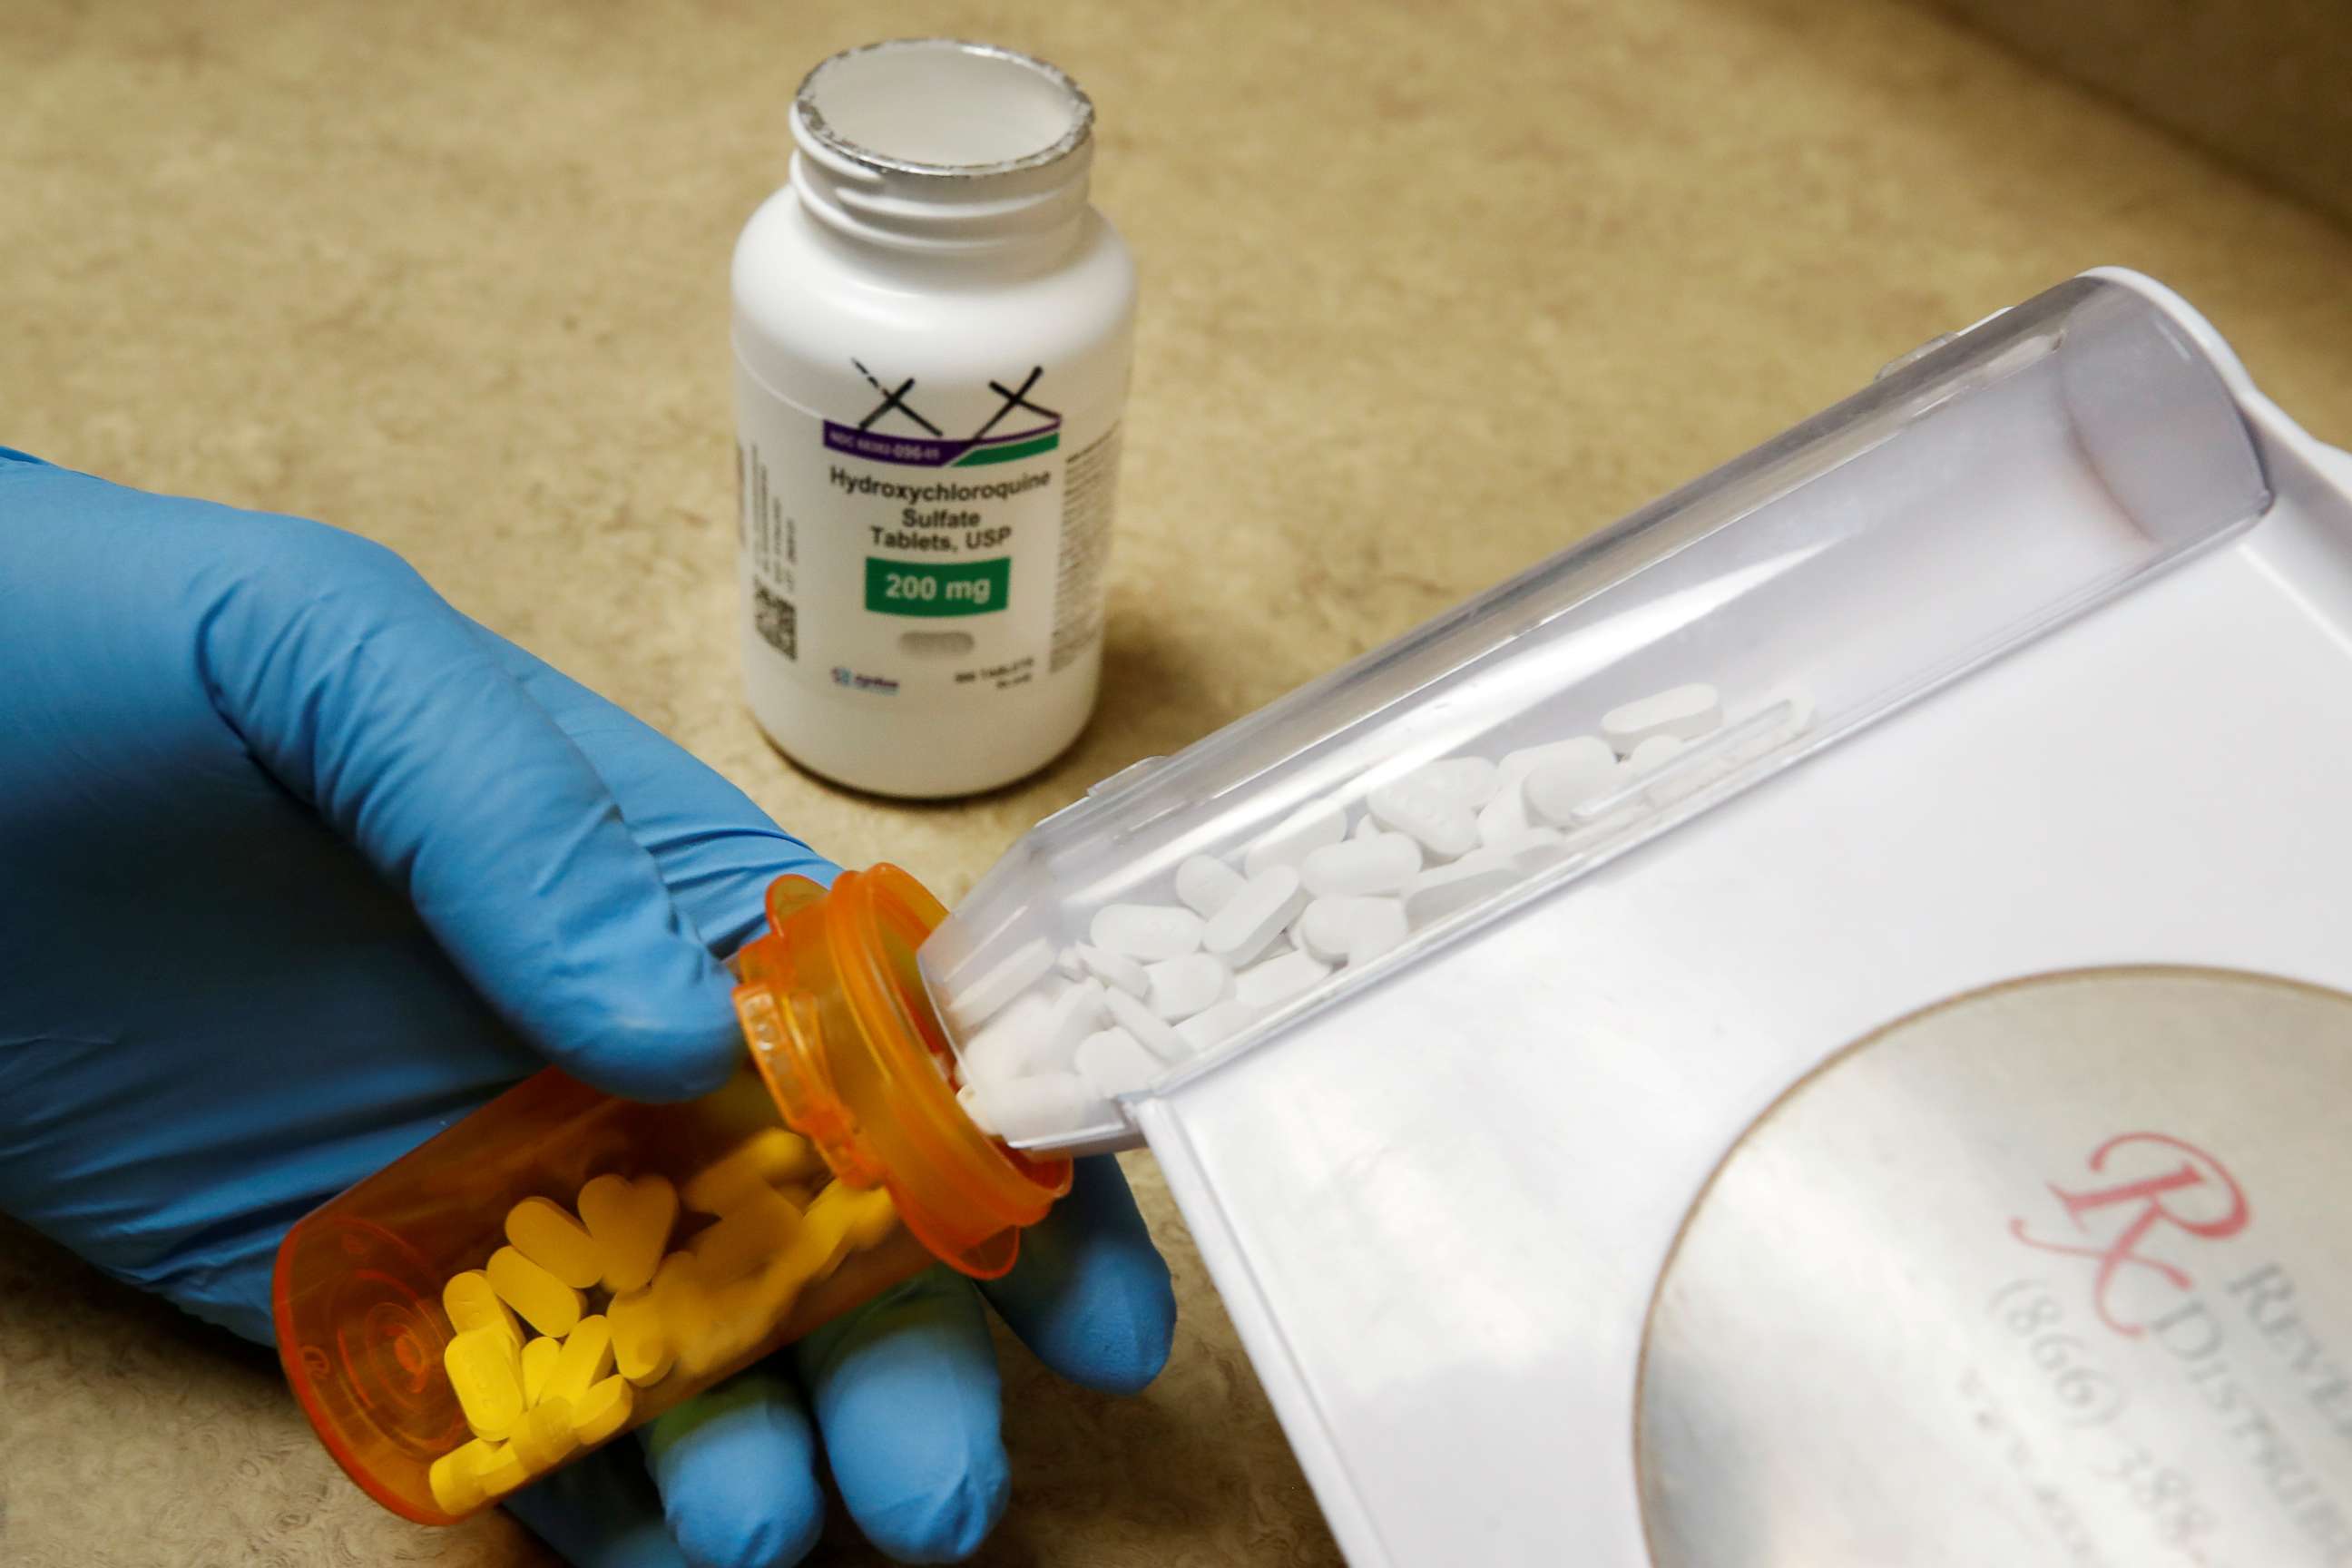 FILE PHOTO: In this May 27, 2020, file photo, the drug hydroxychloroquine is displayed by a pharmacist at a pharmacy in Provo, Utah.